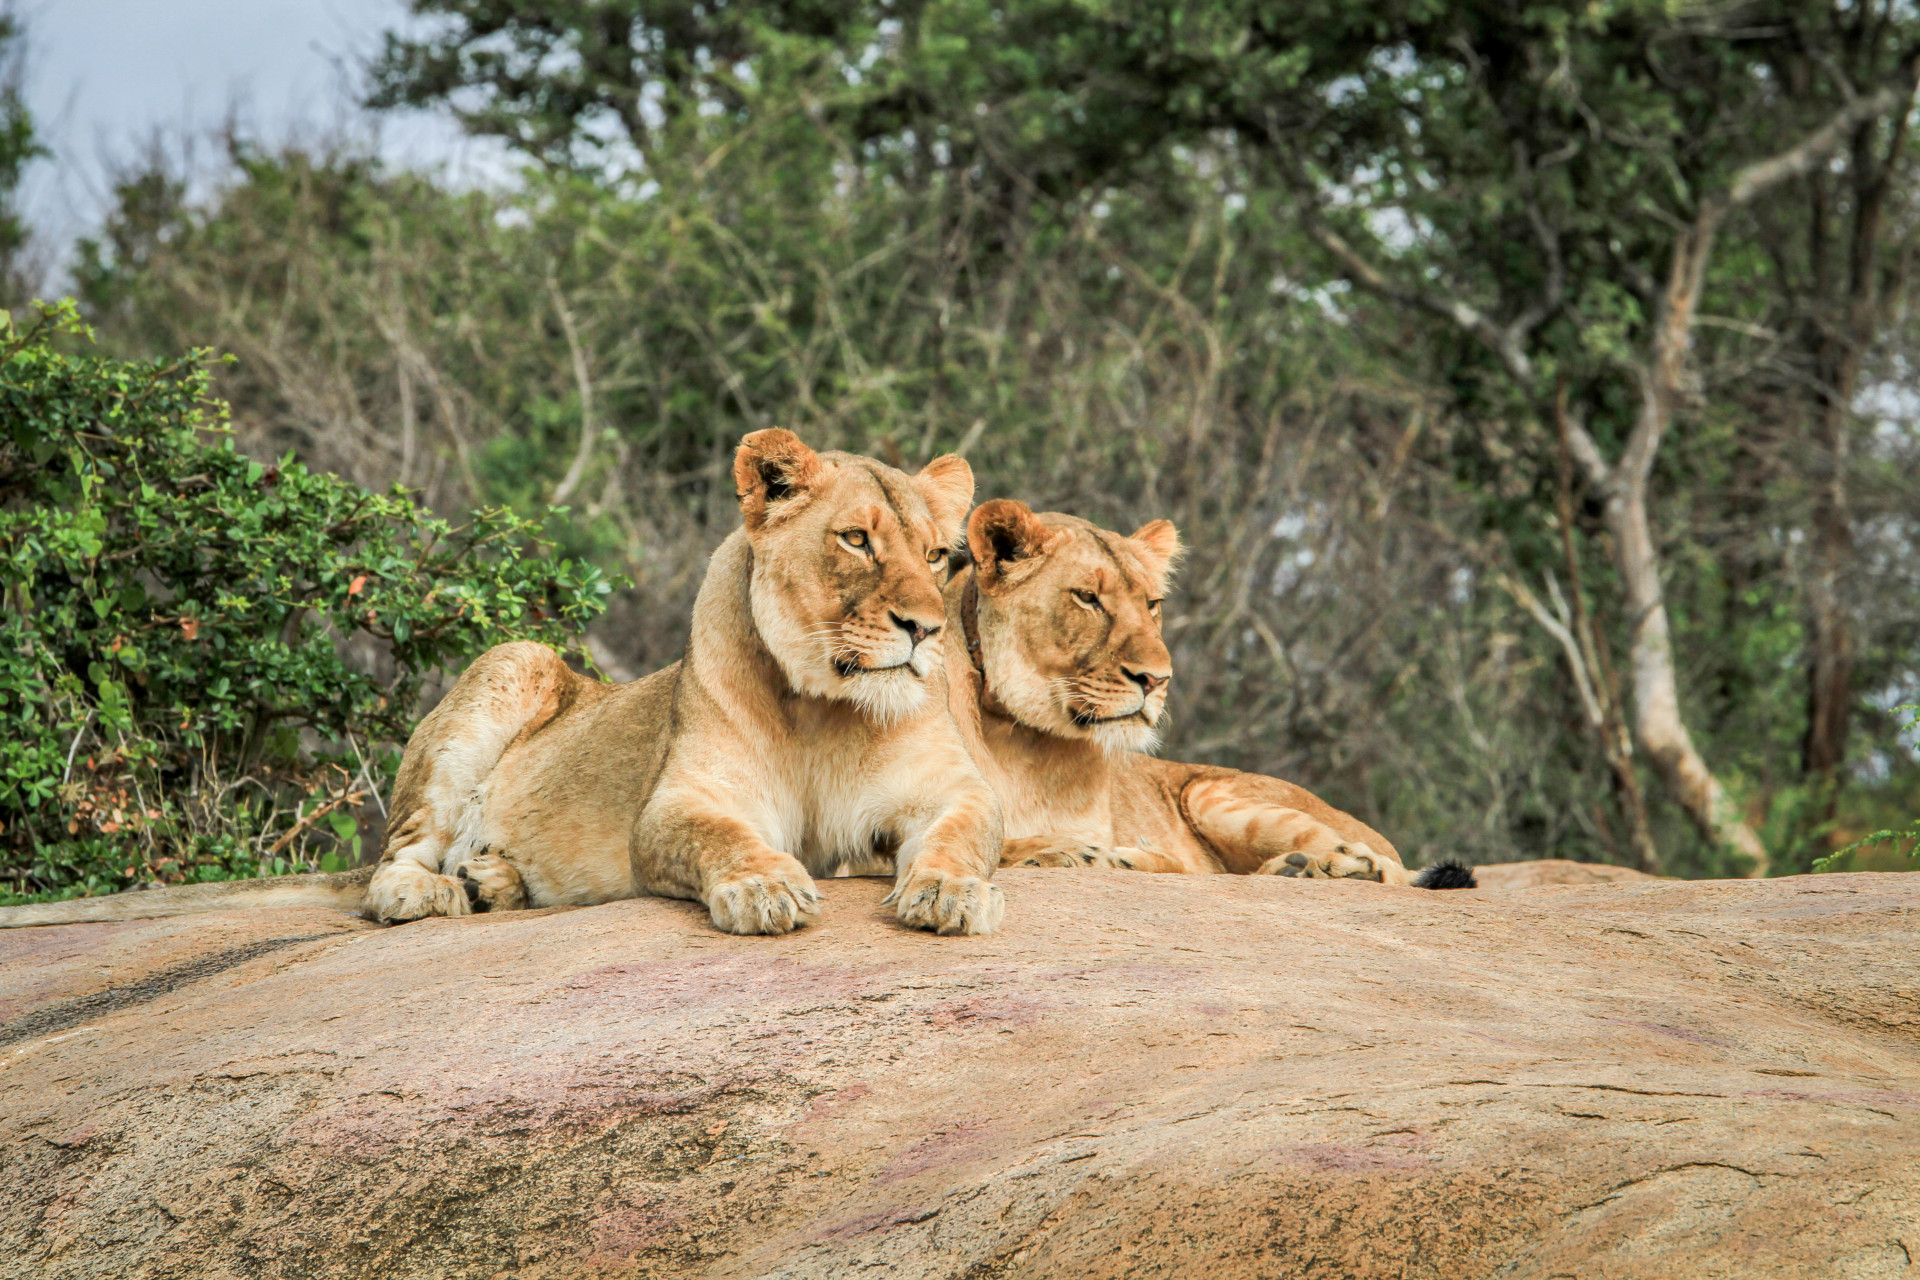 Lions, leopards, rhinos, elephants, buffaloes, and birds such as storks, vultures and eagles inhabit this place.<p>You may also like:<a href="https://www.starsinsider.com/n/329714?utm_source=msn.com&utm_medium=display&utm_campaign=referral_description&utm_content=212512en-us"> Failure to launch: Aircraft that couldn't succeed</a></p>